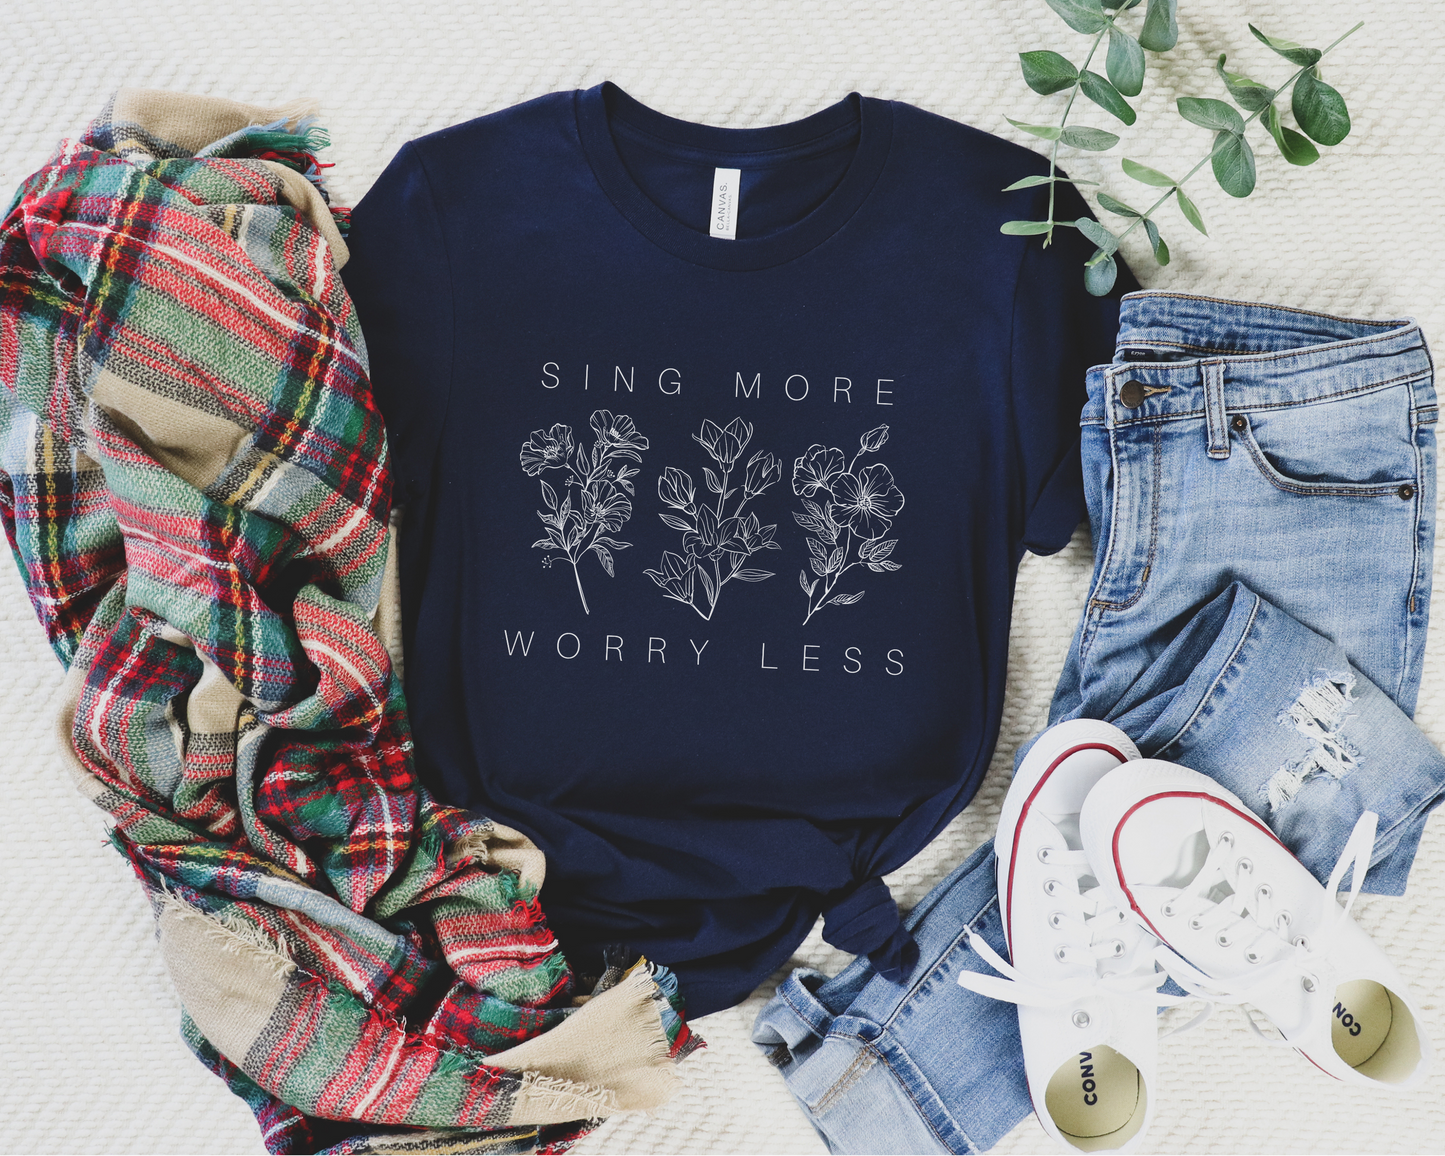 Sing More Worry Less Floral Short-Sleeve Unisex T-Shirt